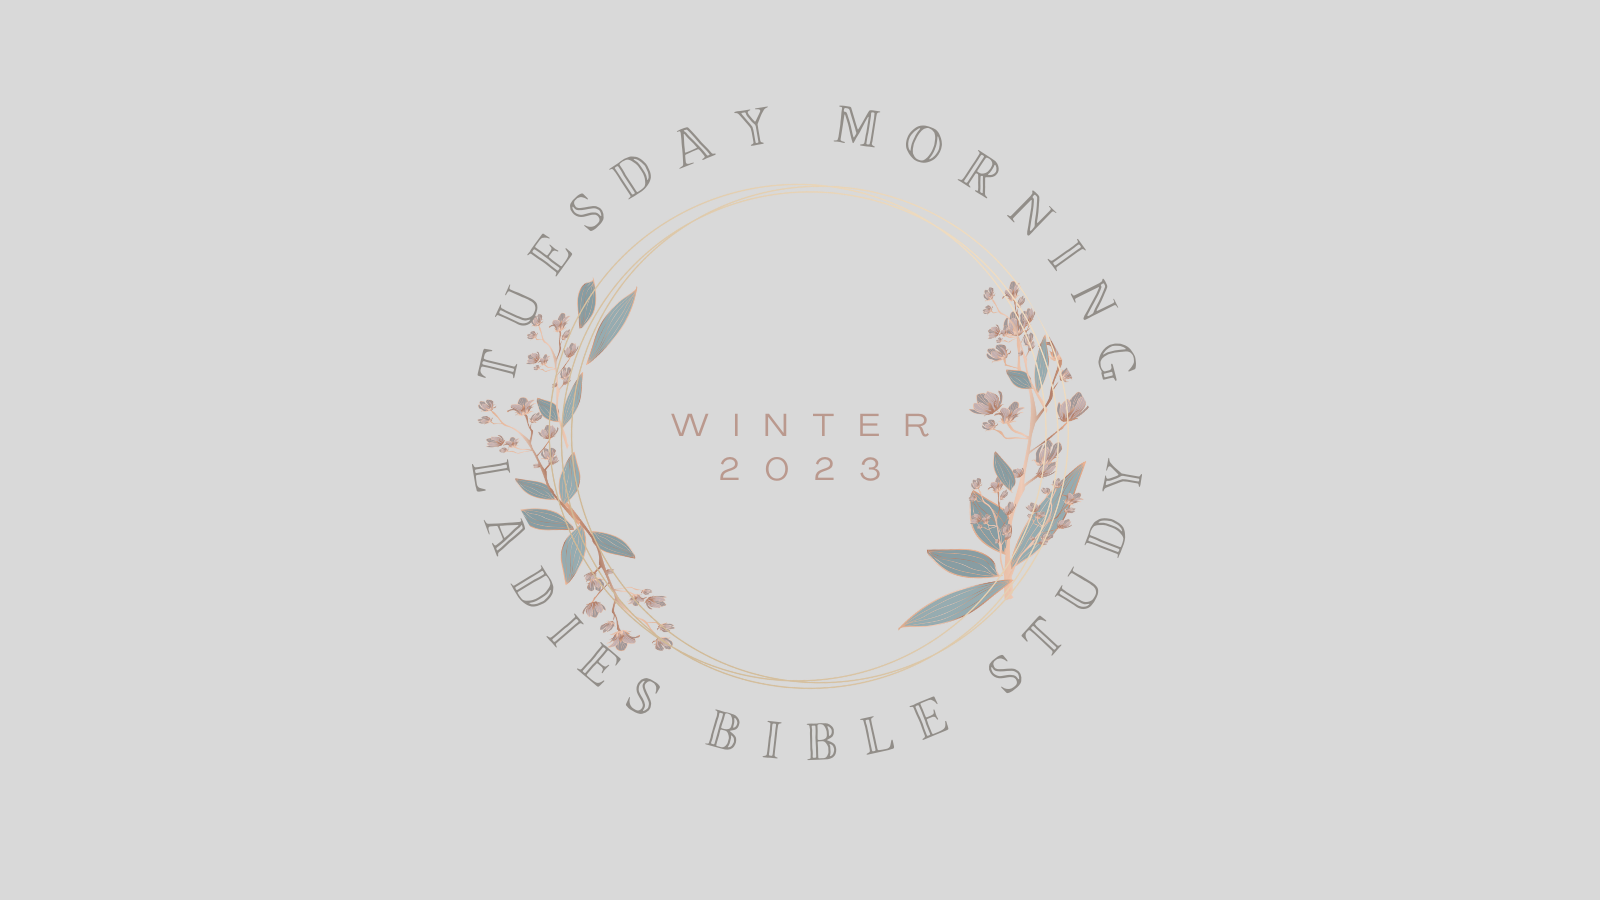 Tuesday Morning Ladies Bible Study graphic 23  (1600 × 900 px) image